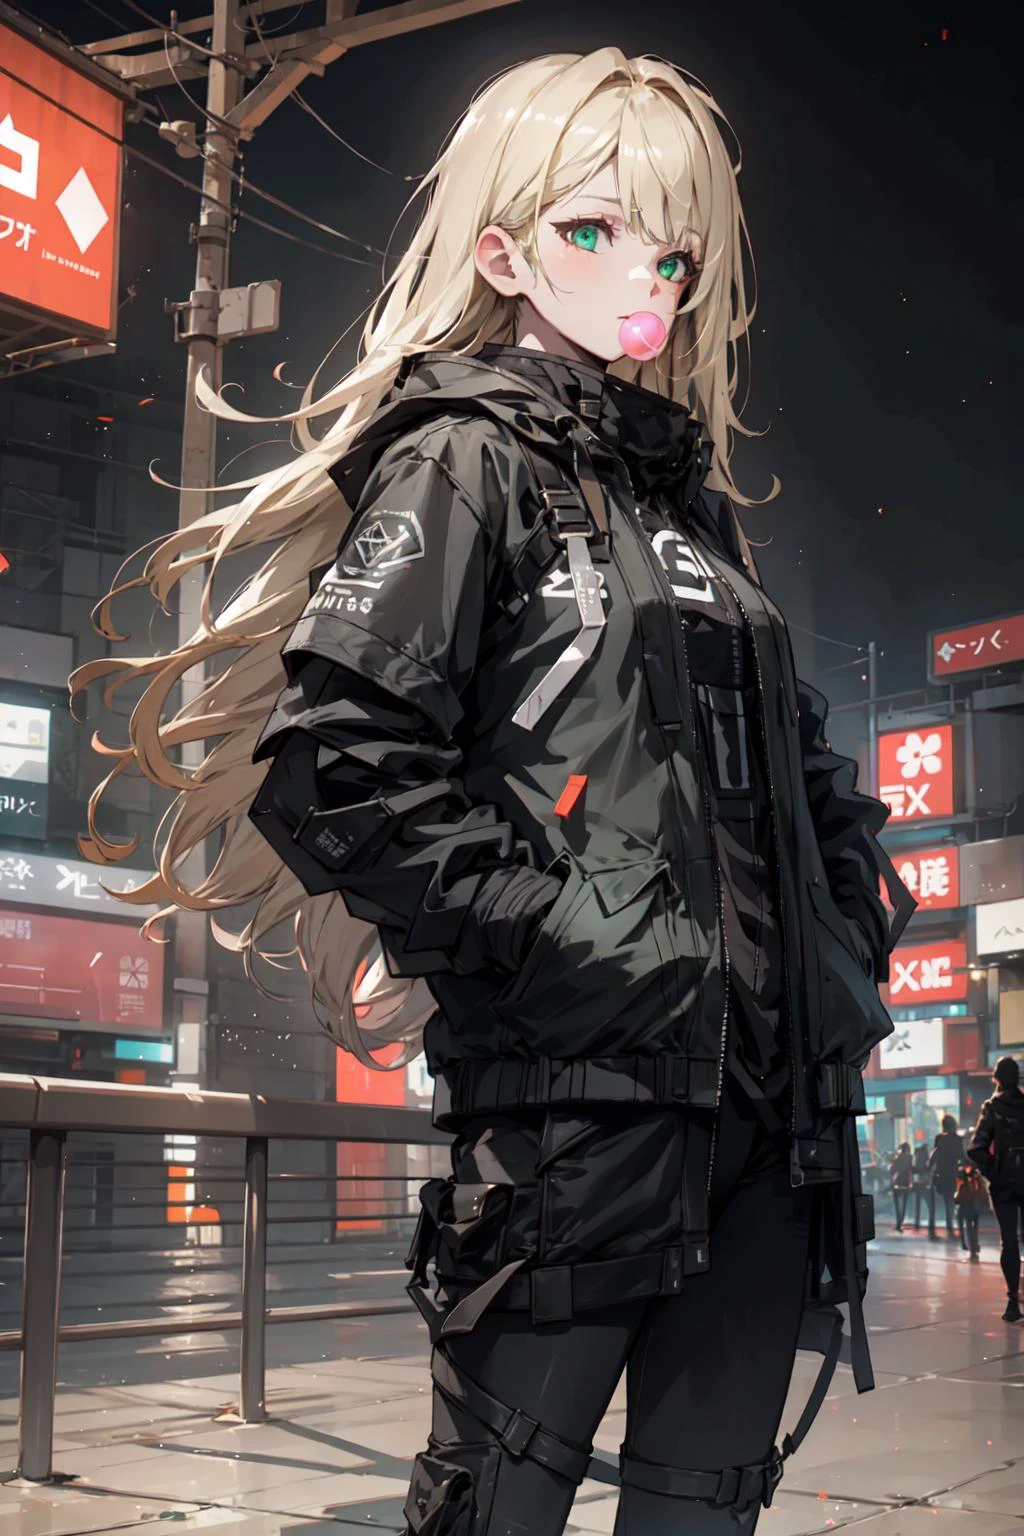 a girl blowing a big bubblegum with both of her hand in her pocket , (hands in pocket:1.4),  (big bubblegum:1.4), (Shibuya:1.4), (night lights:1.4), (Thick Body:1.4), (Long Blond Hair:1.4), Green Eyes, HDR (High Dynamic Range), Ray Tracing, NVIDIA RTX, Super-Resolution, Unreal 5, Subsurface Scattering, PBR Texturing, Post-Processing, Anisotropic Filtering, Depth-Of-Field ,Maximum Clarity And Sharpness, Multi-Layered Textures, Albedo And Specular Maps, Surface Shading, Accurate Simulation Of Light-Material Interaction, Octane Render, Two-Tone Lighting, Low ISO, White Balance, Rule Of Thirds, Wide Aperture, 8K RAW, Efficient Sub-Pixel, Sub-Pixel Convolution, (Luminescent Particles:1.4), {{Masterpiece, Best Quality, Extremely Detailed CG, Unity 8k Wallpaper, 3D, Cinematic Lighting, Lens Flare}},  